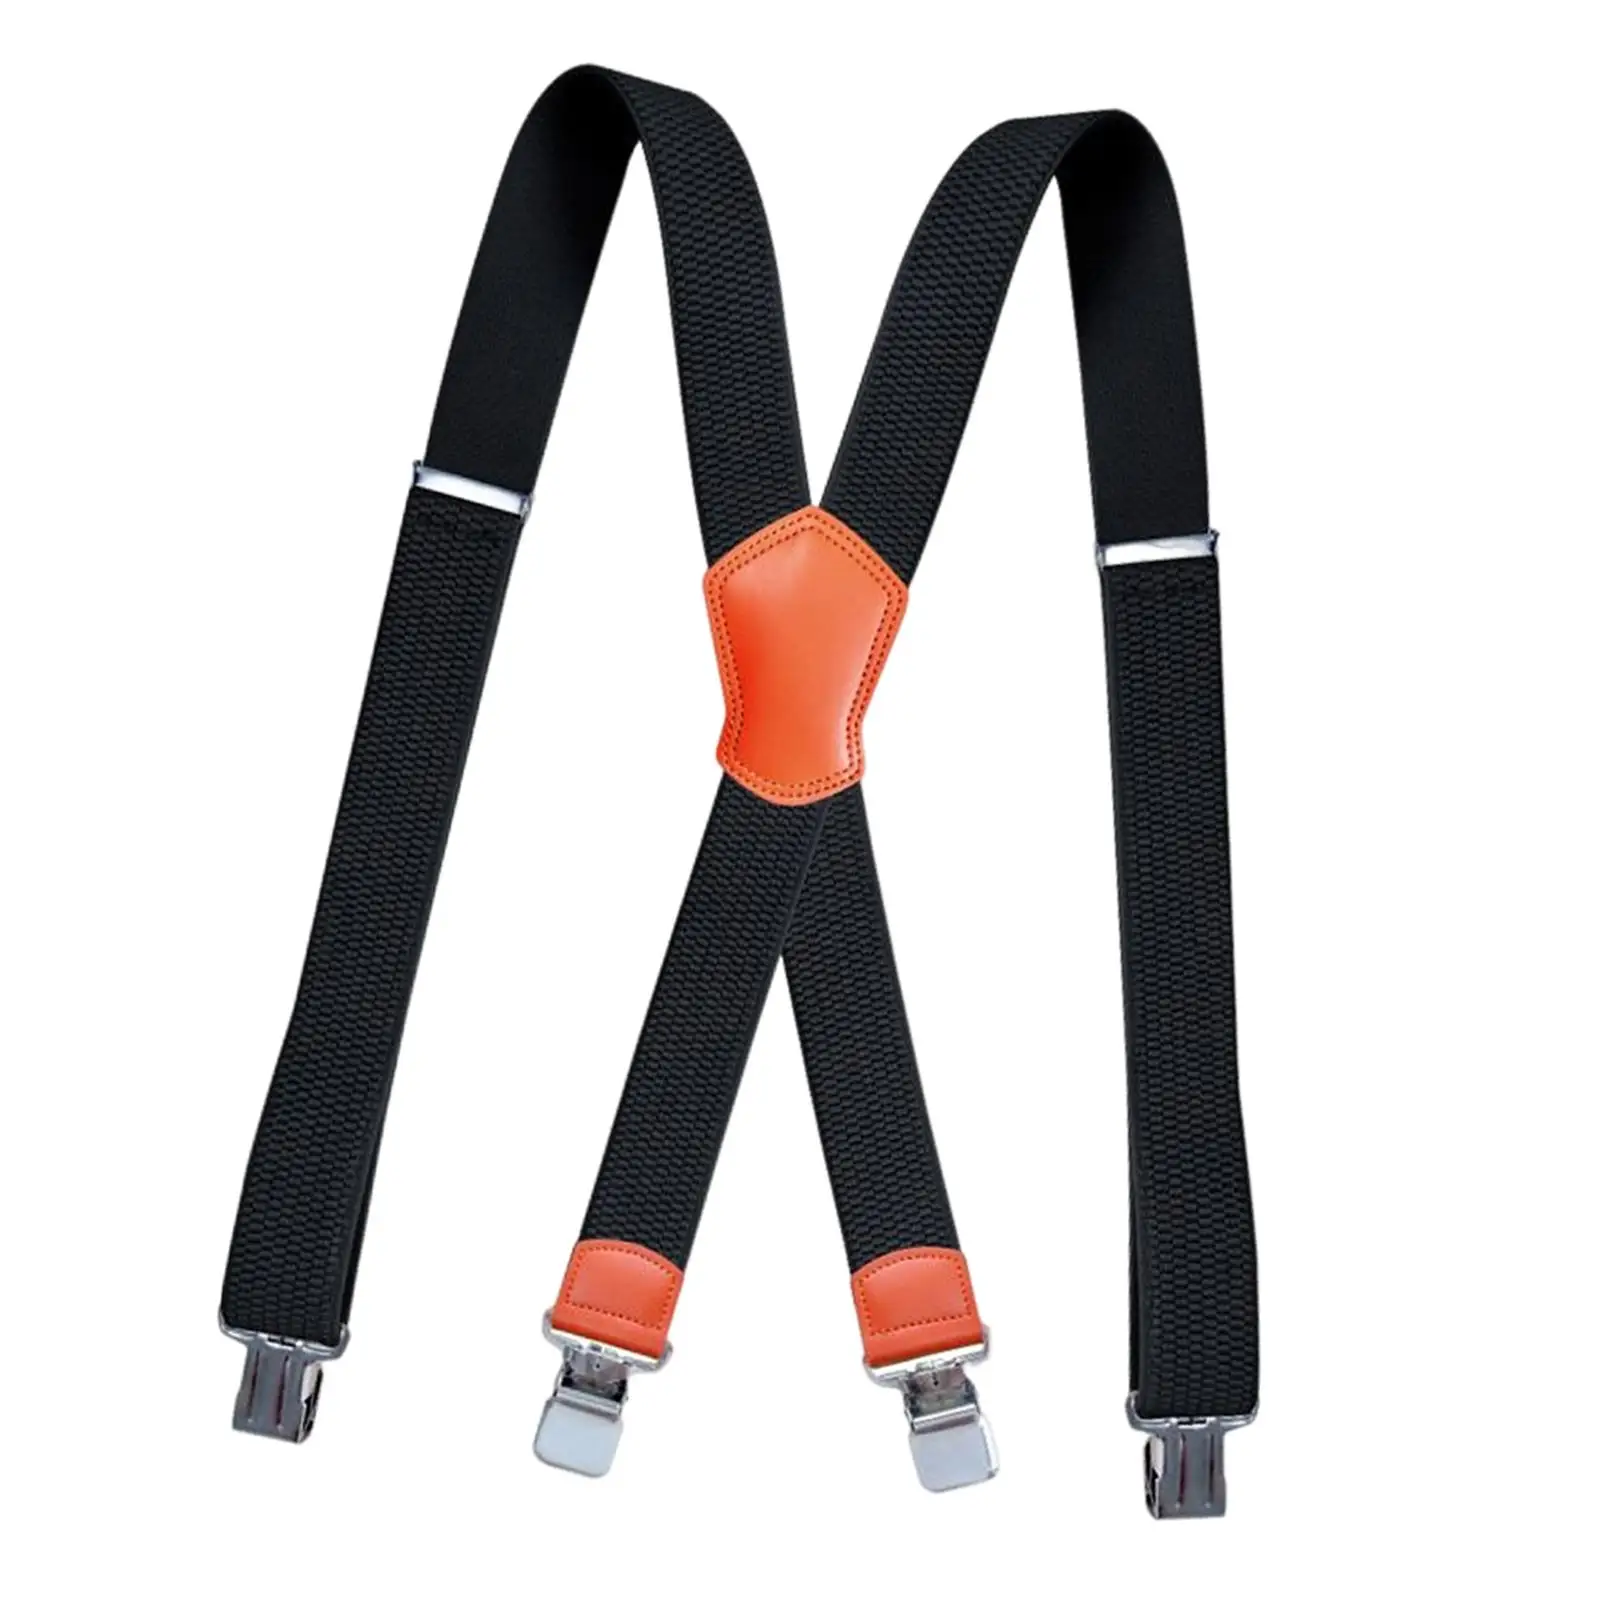 Stylish Unisex Suspenders with Sturdy Metal Clips for Men and Women